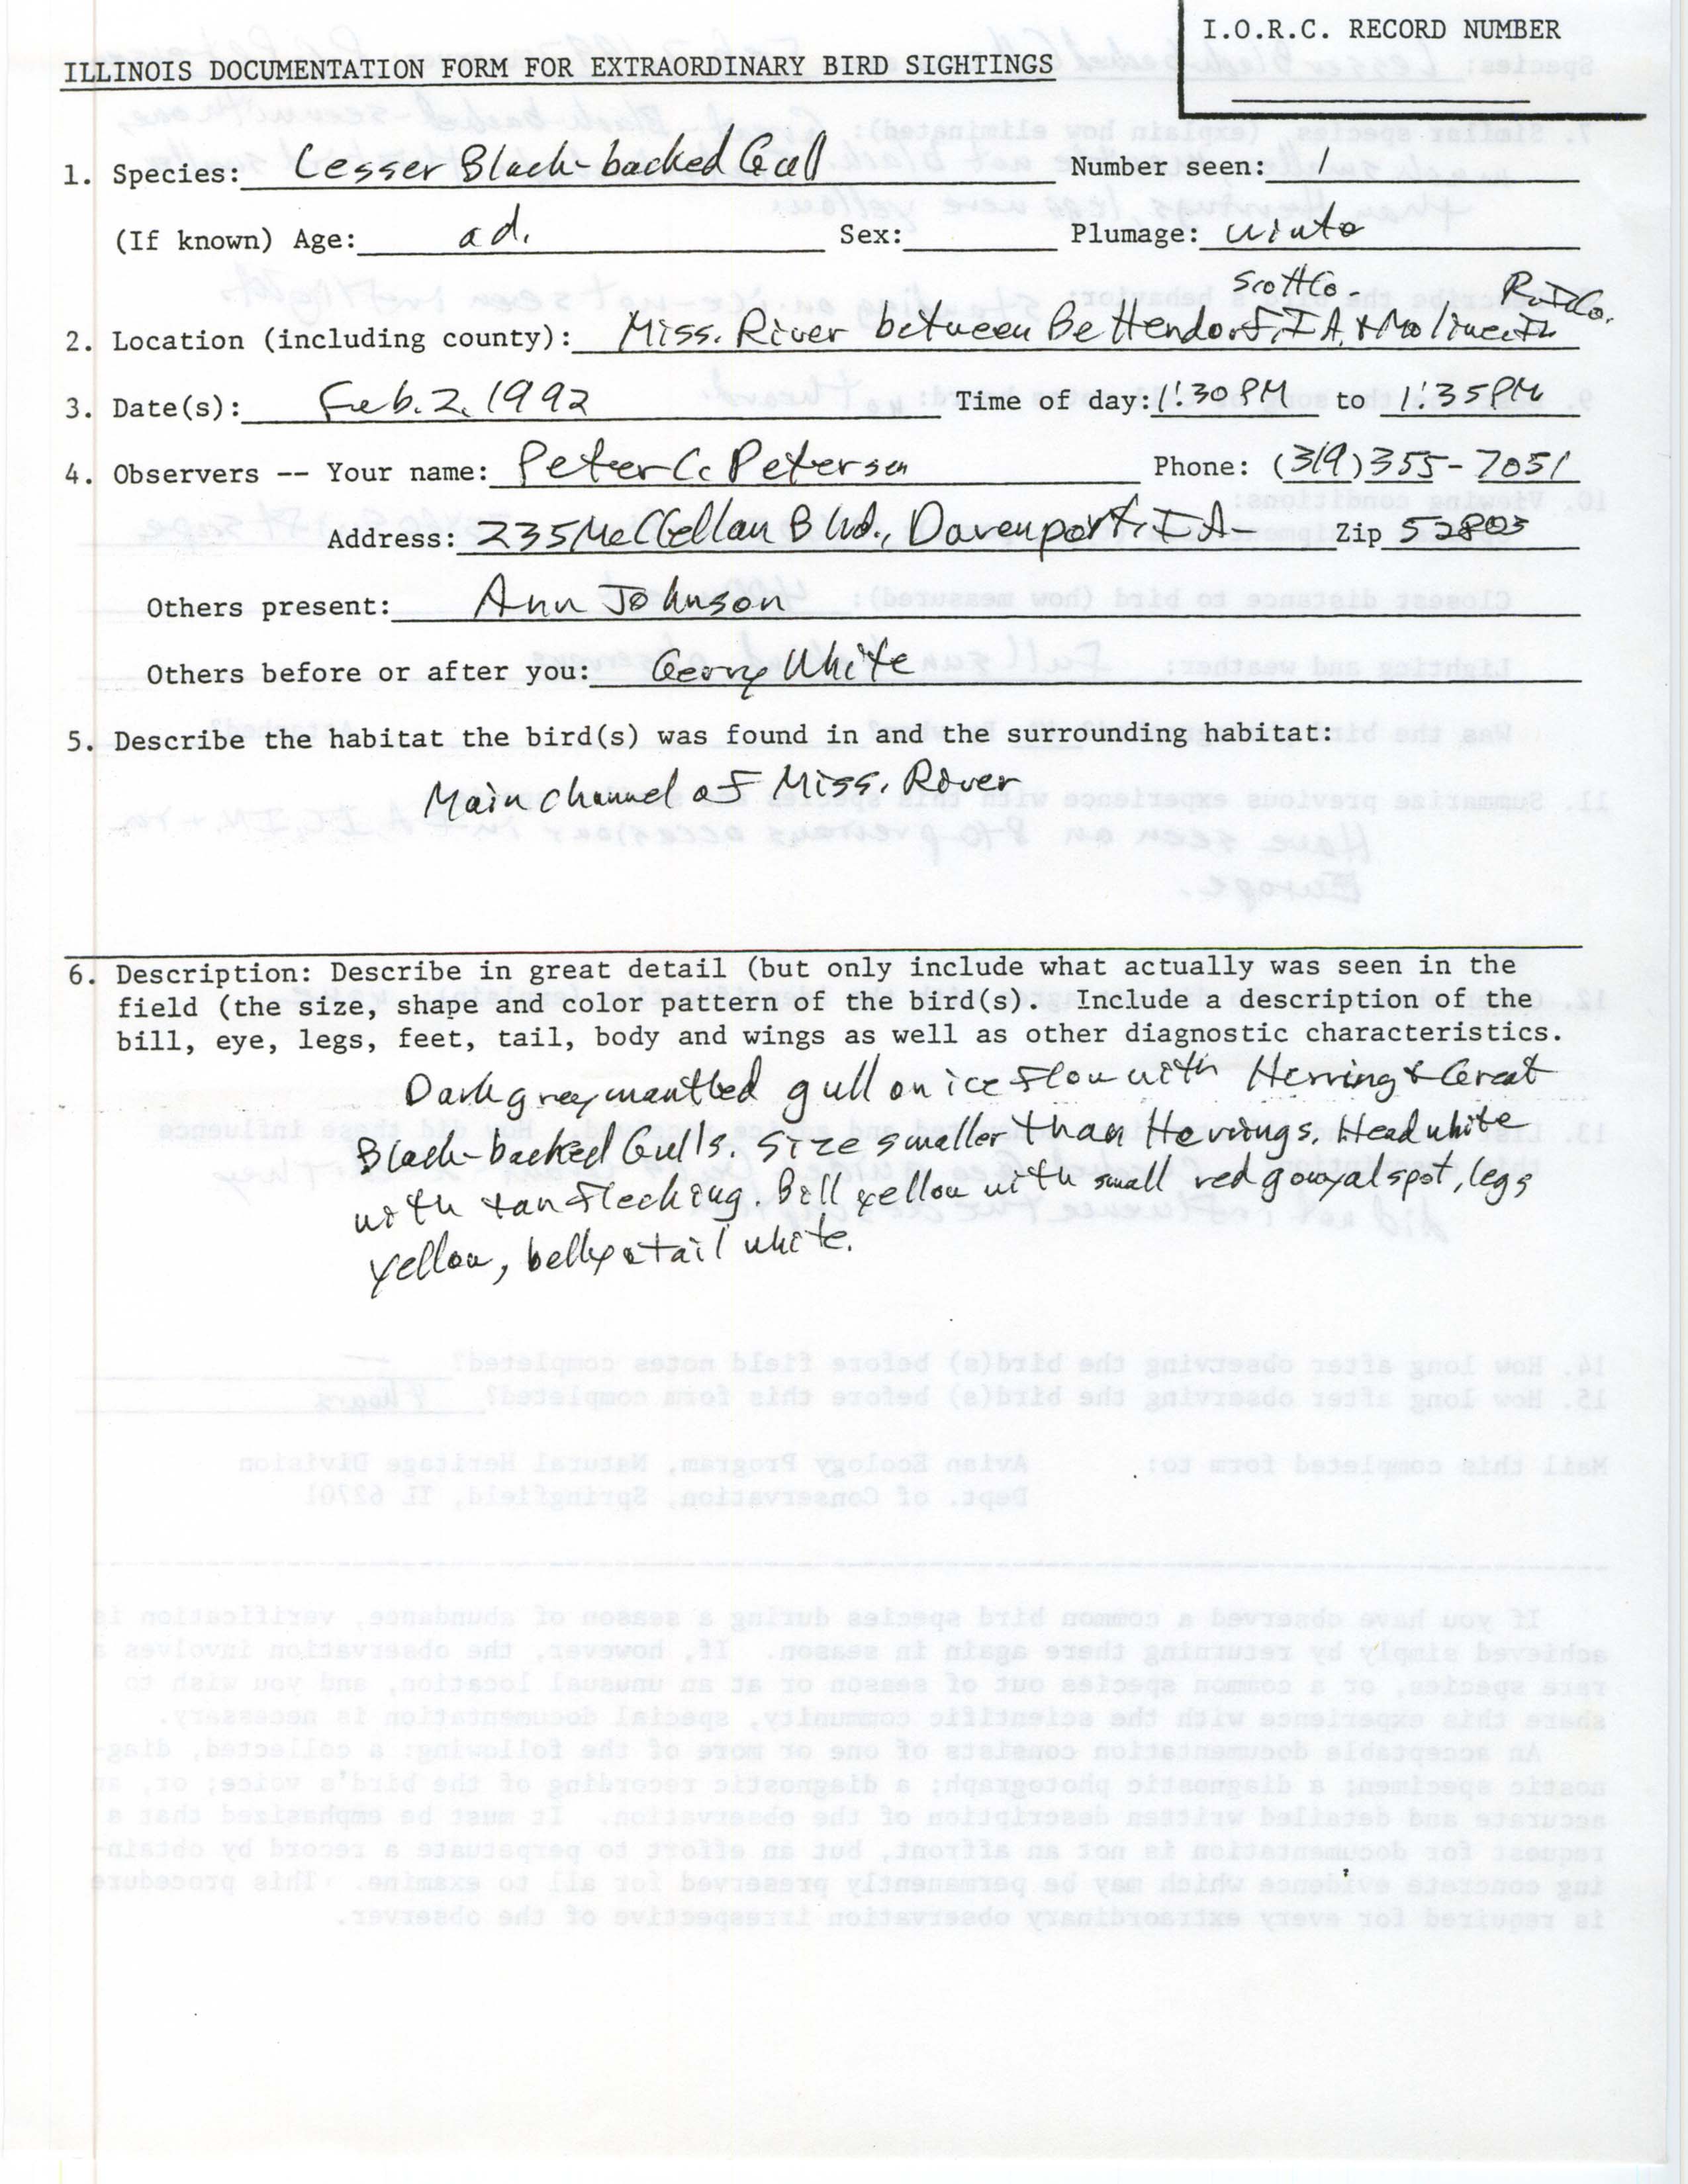 Rare bird documentation form for Lesser Black-backed Gull on the Mississippi River between Bettendorf, IA and Moline, IL, 1992